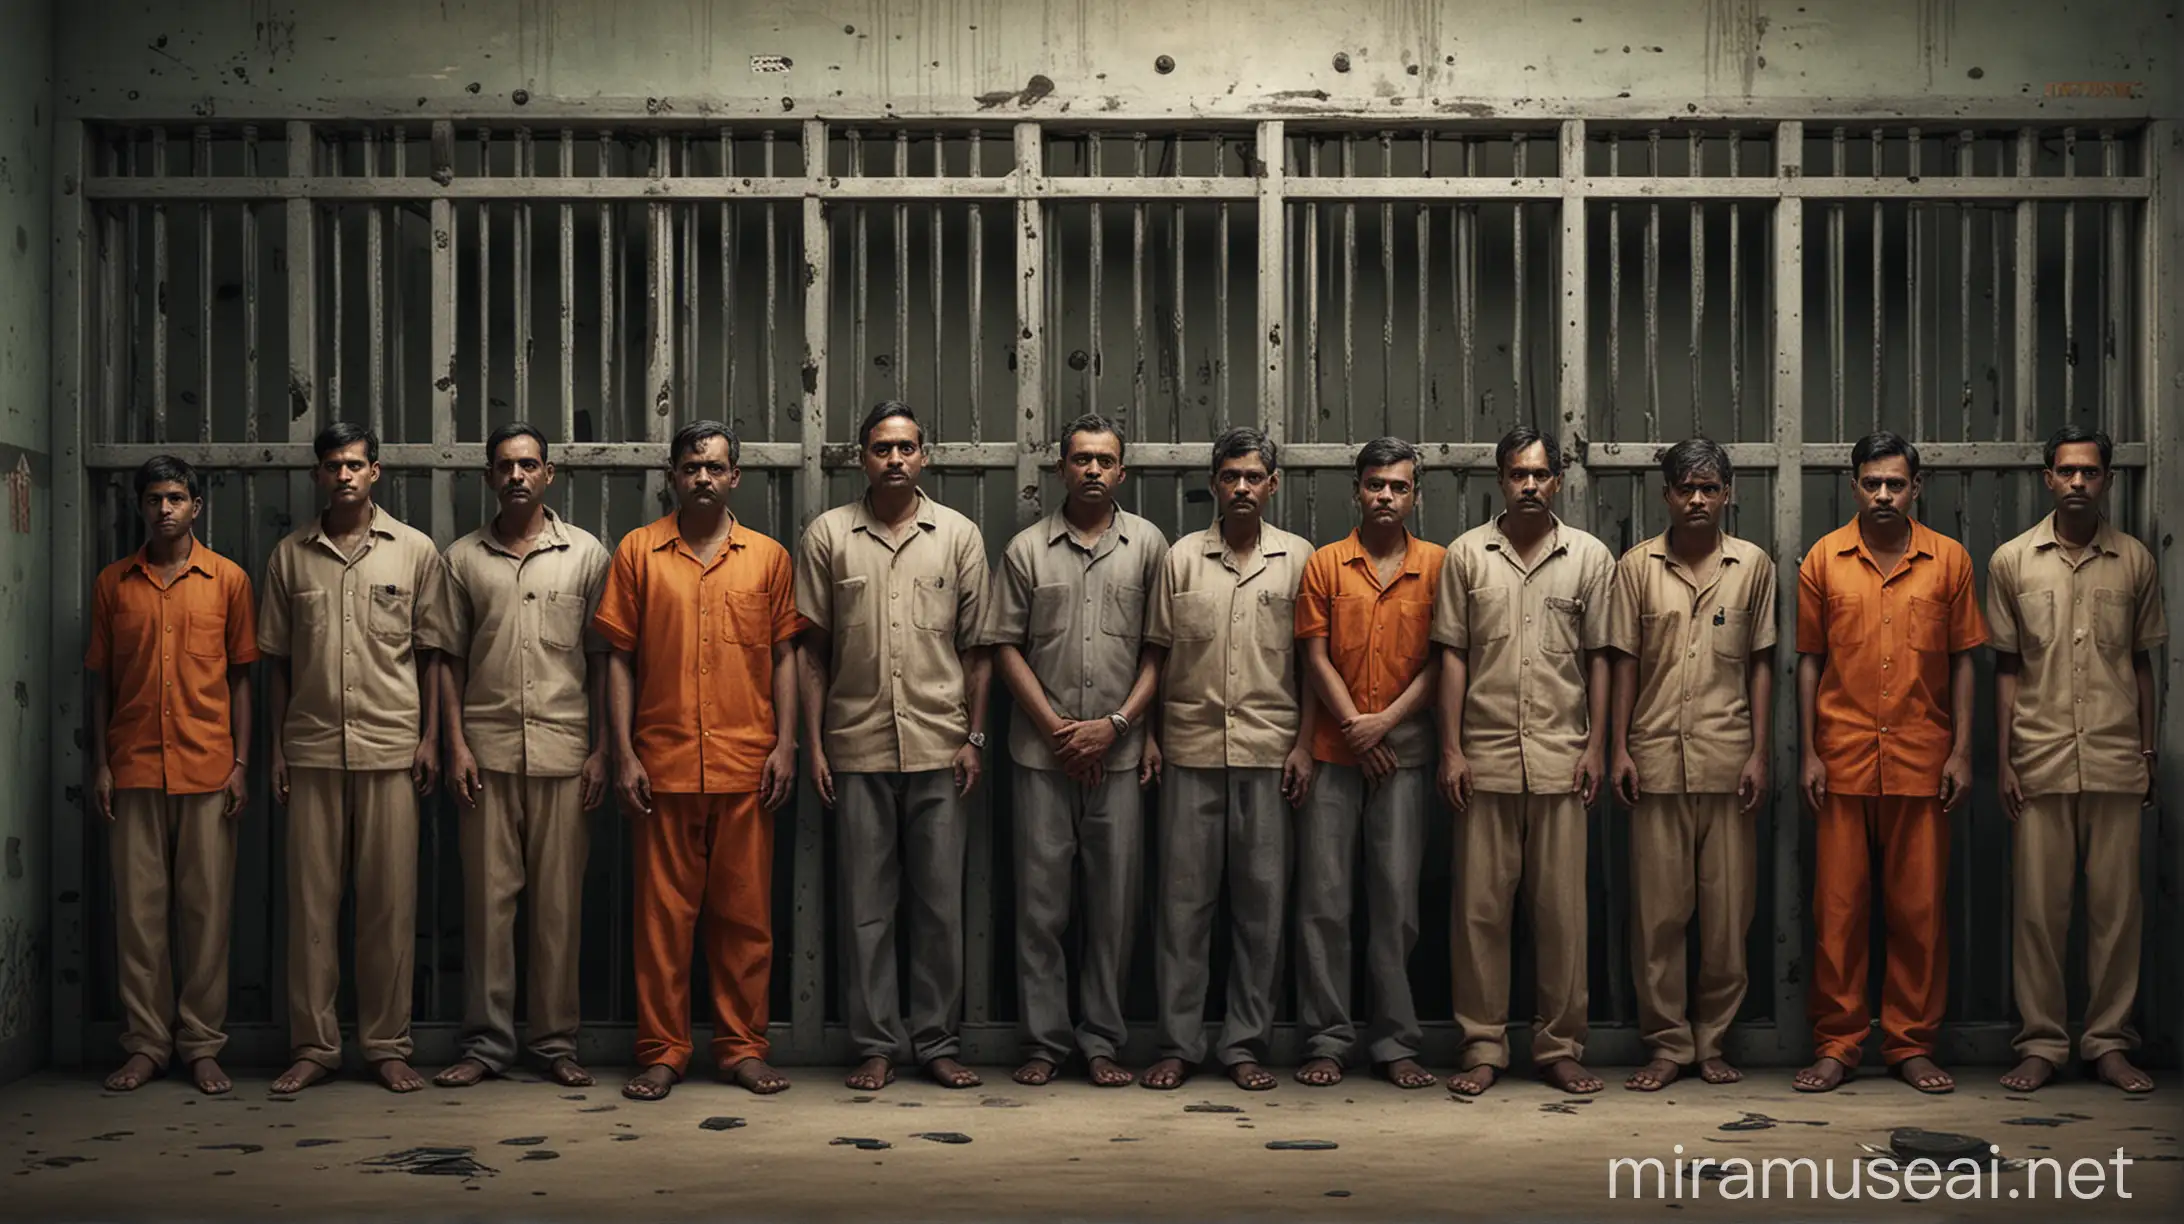 Realistic AI Image Life Behind Bars in Indian Prisons